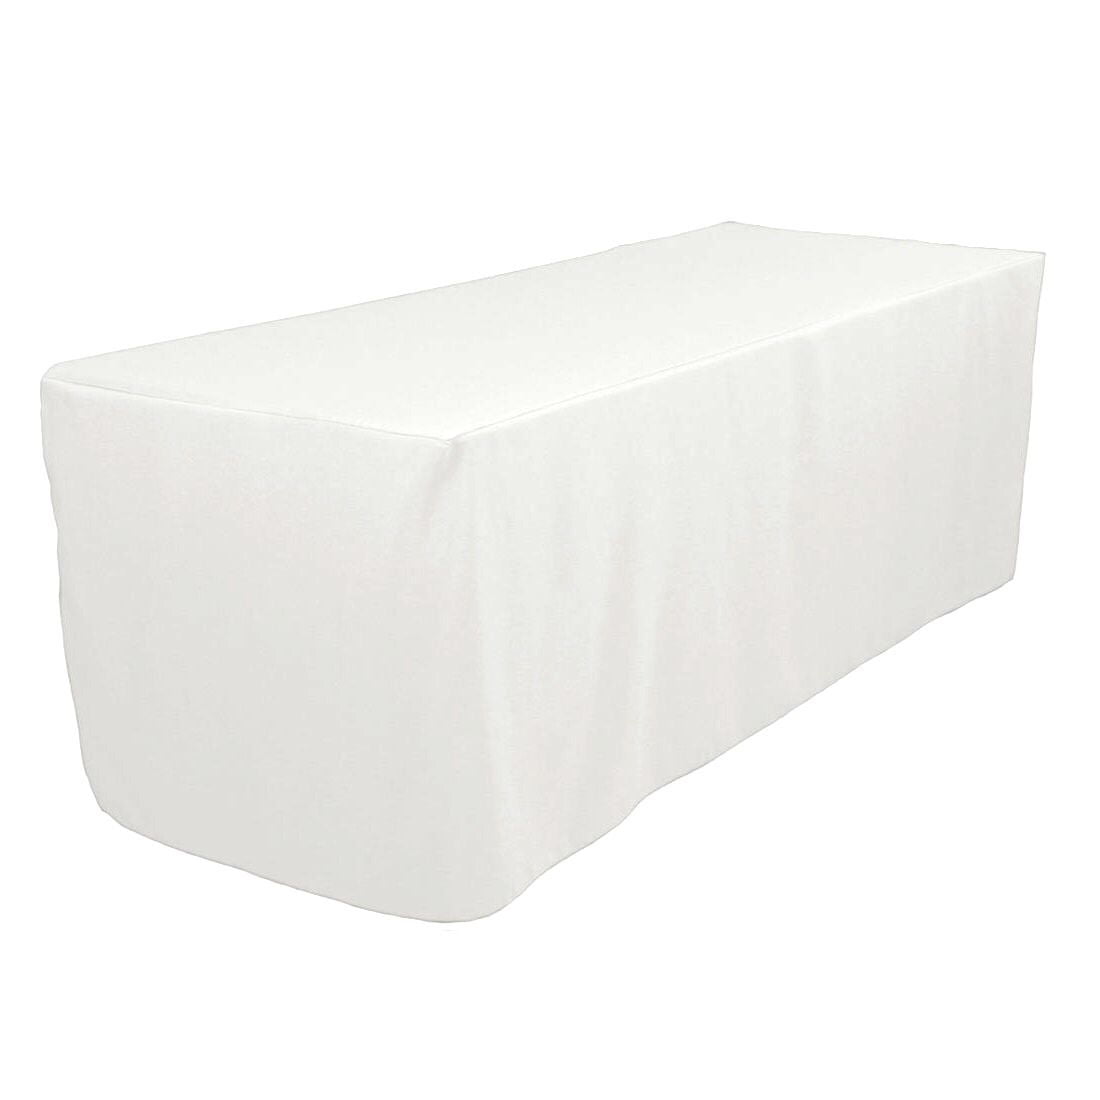 Royal 8-Feet Fitted Rectangle Polyester Tablecloth Wedding Party & Dj Table White